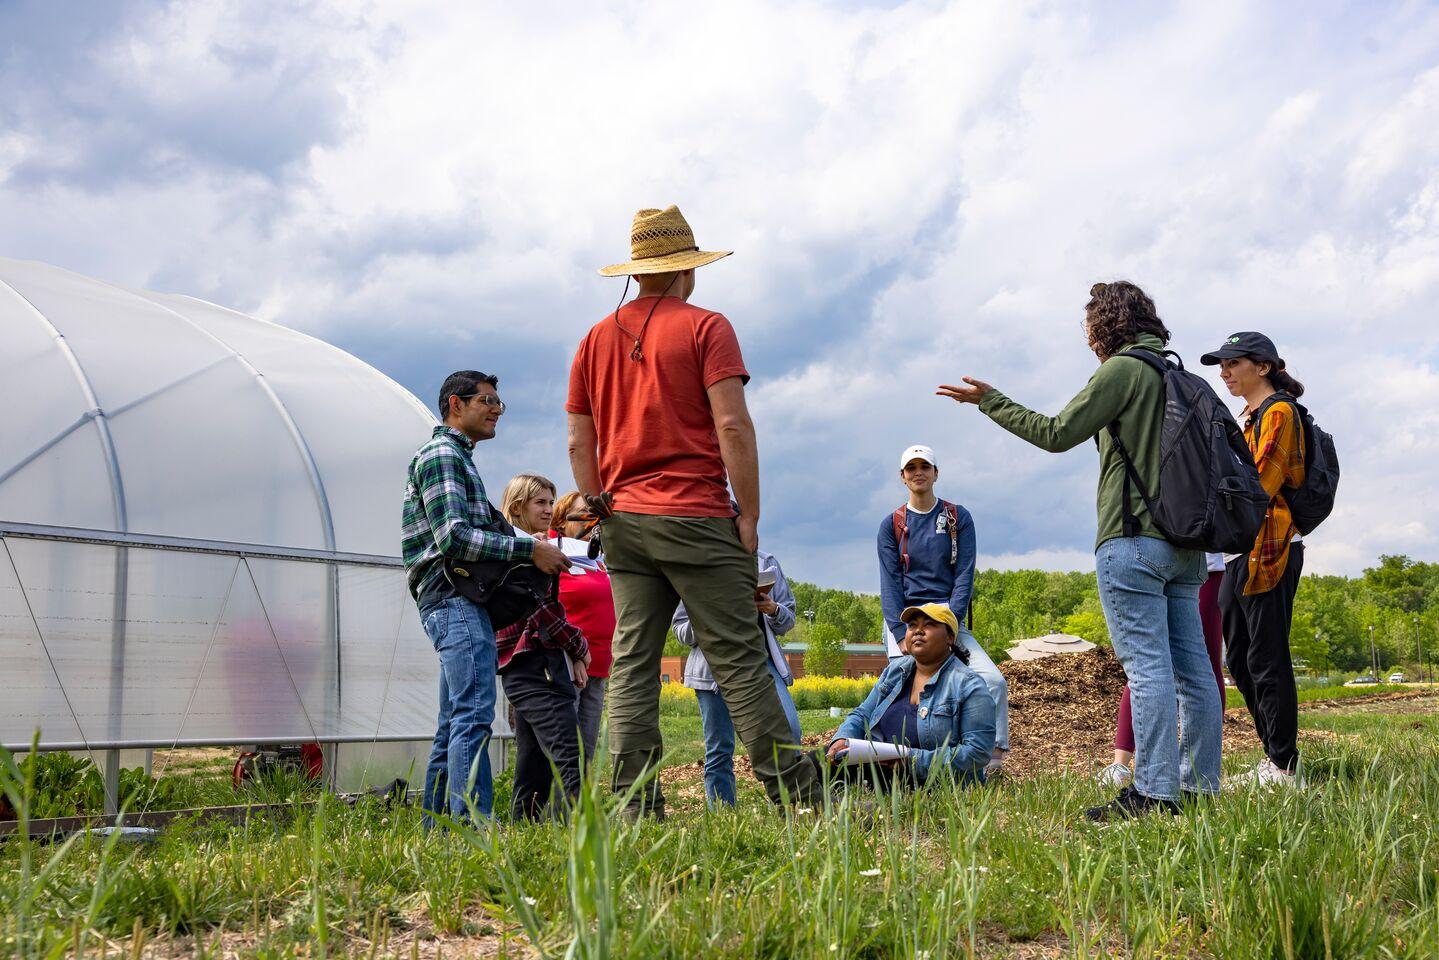 Urban Farm incubator at Watkins Regional Park. Outdoor classroom research with Professor Rachel Goldstein teaching MIEH773: Foodborne, Waterborne and Airborne Infectious Diseases, part of the School of Public Health: Maryland Institute for Applied Environmental Health..